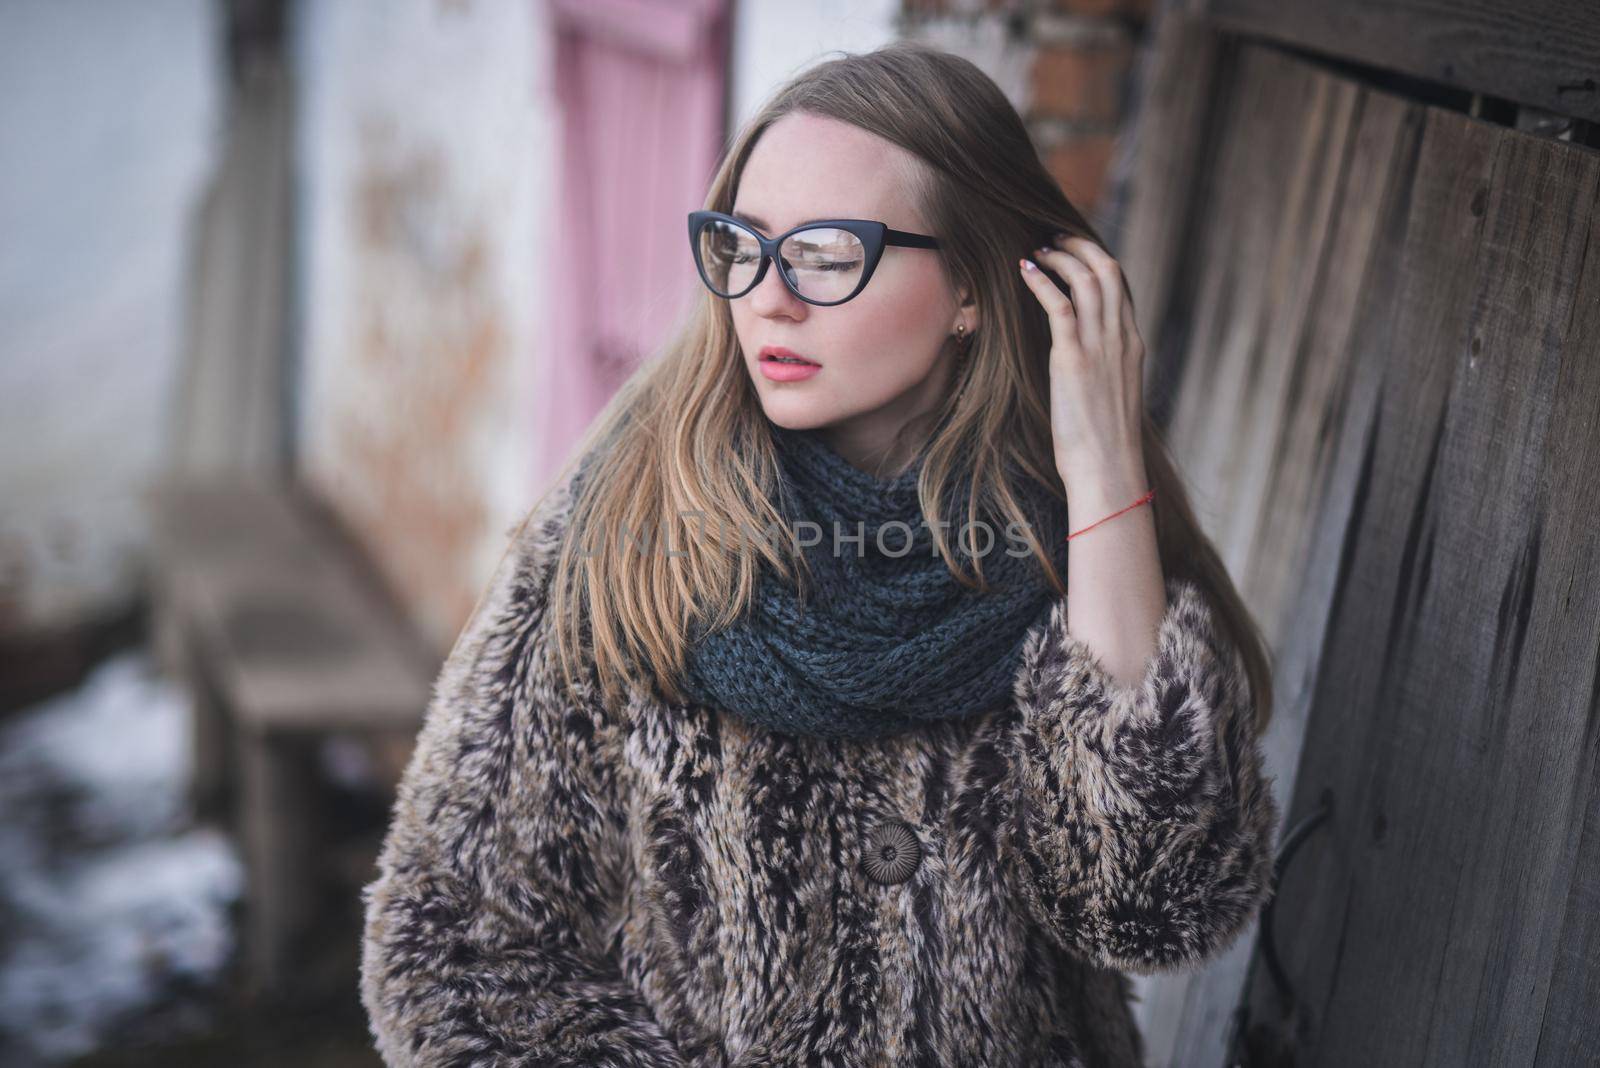 Girl blonde in cat eyes glasses in an artificial faux fur coat posing. Lying snow on the background. Red orange pink tones in the photo. Around the old shabby abandoned buildings. Cold winter